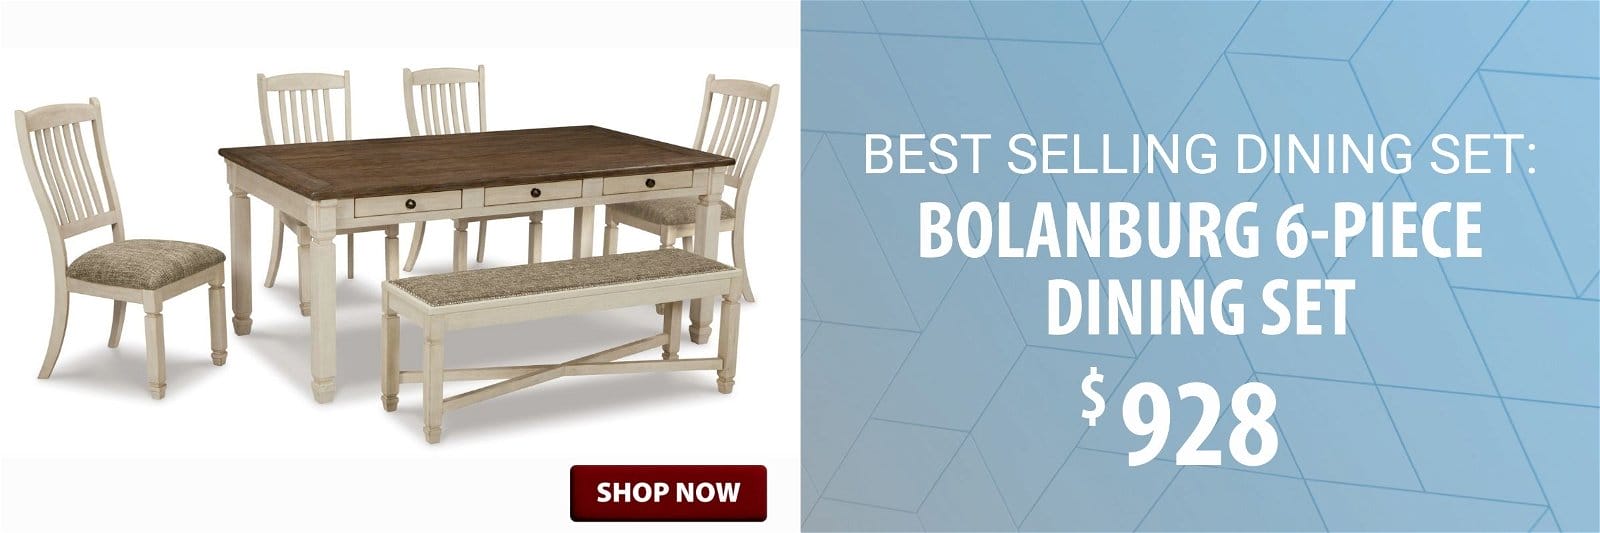 Best selling dining set at \\$928